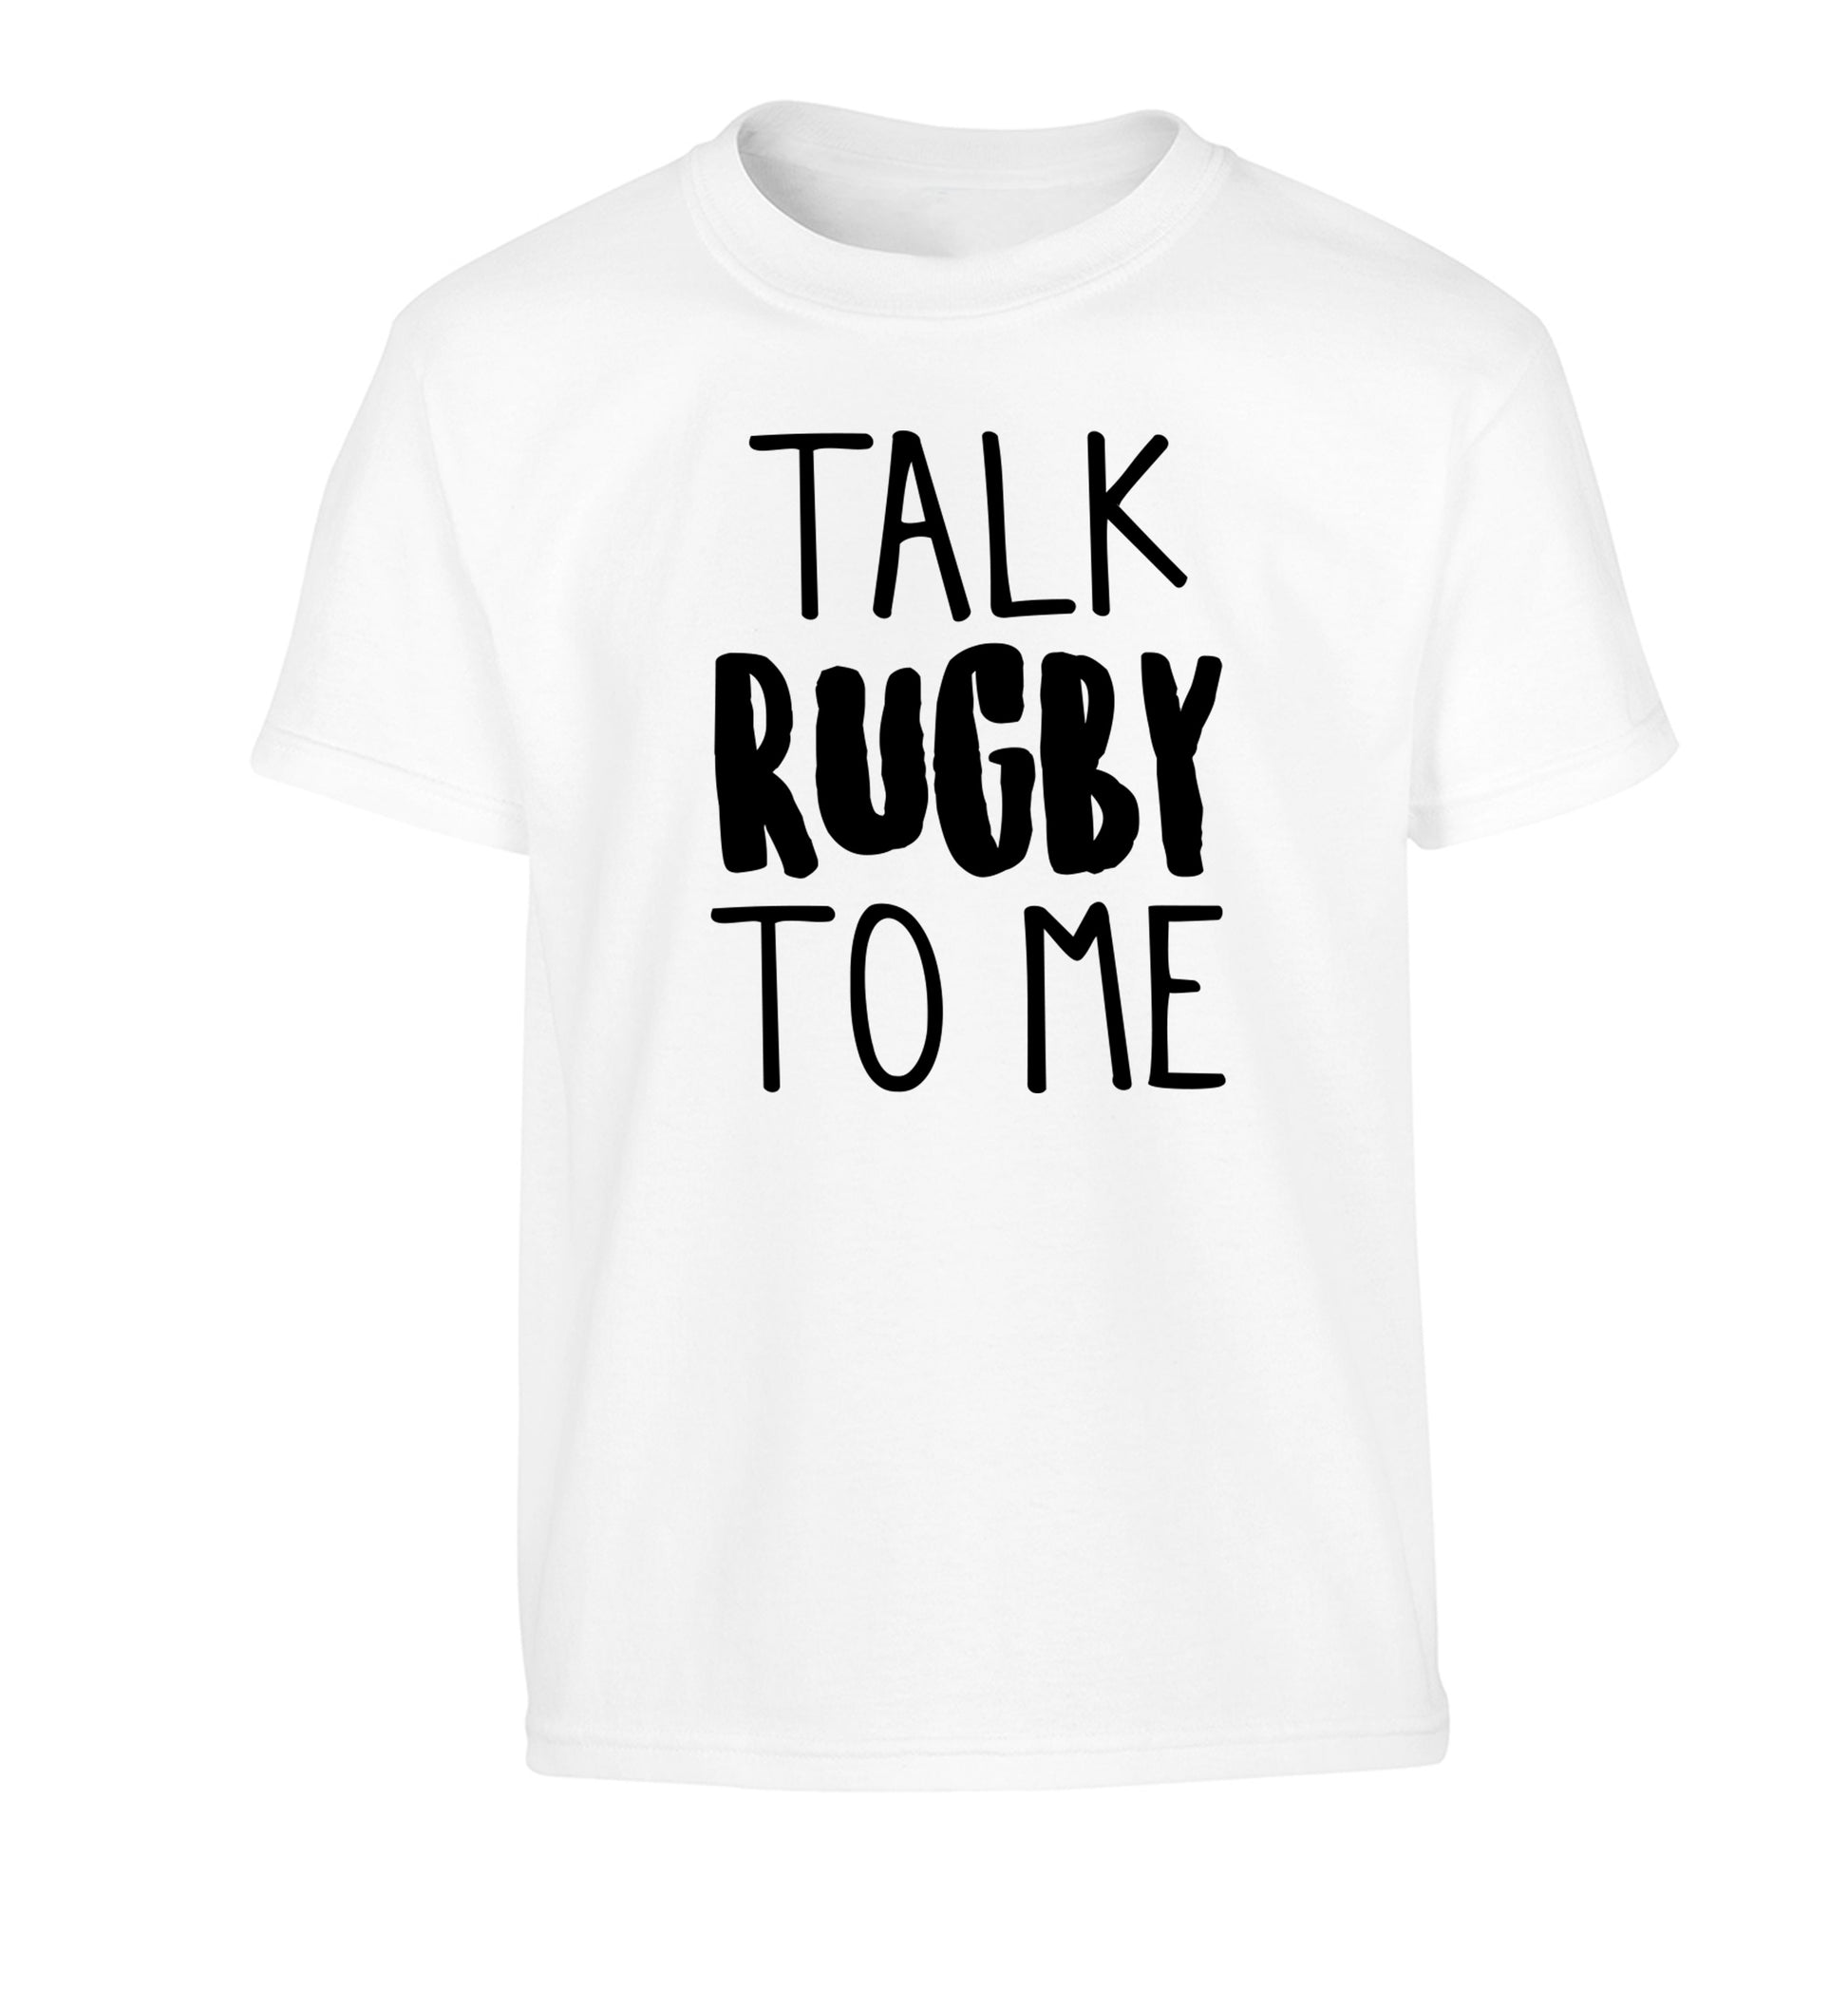 Talk rugby to me Children's white Tshirt 12-13 Years